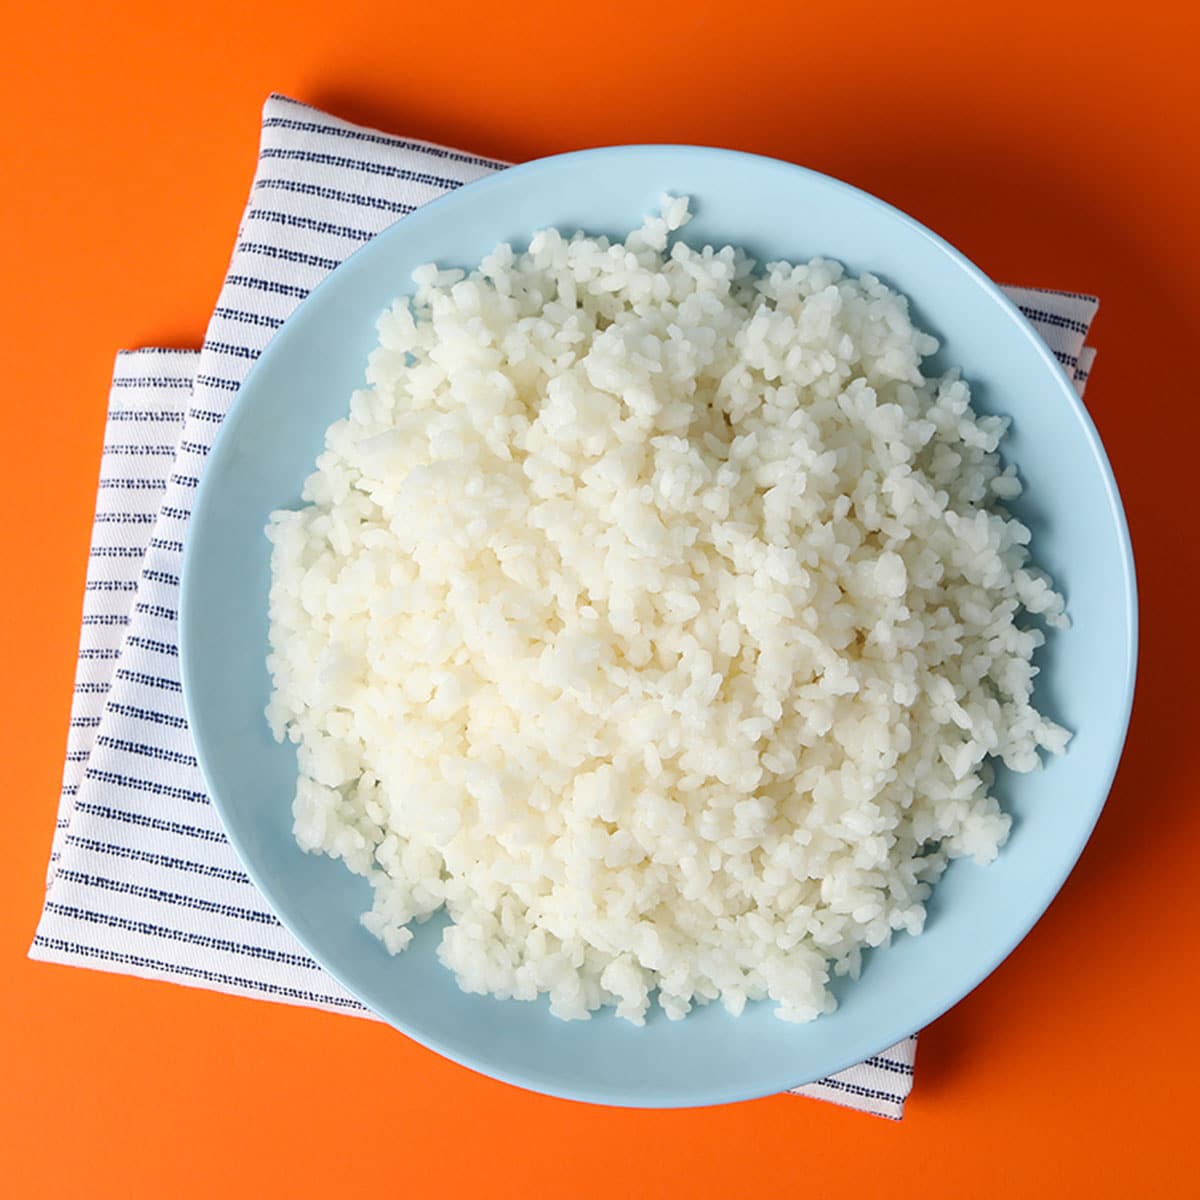 This guide will help you how to fix undercooked rice, enabling you to make a perfect batch of rice every time.